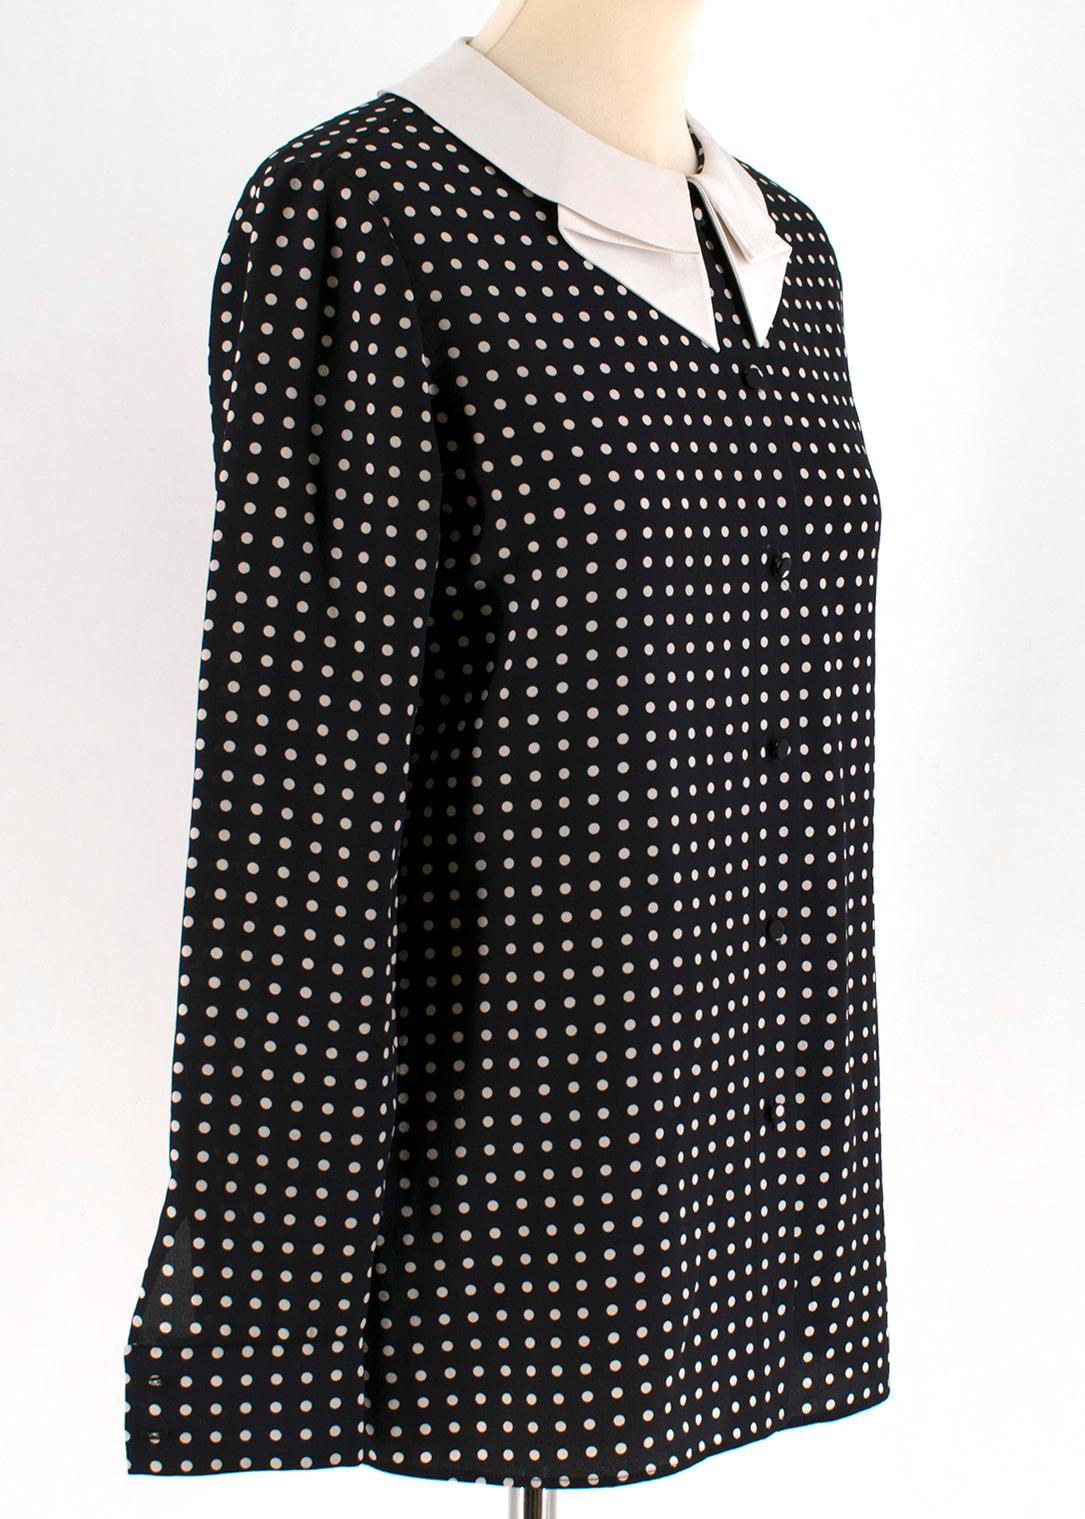 Saint Laurent Black Polka Dot Silk Shirt

- black silk shirt
- white polka dot pattern 
- white collar
- button fastening
- lightweight

This seller usually wear size XS.

Please note, these items are pre-owned and may show some signs of storage,